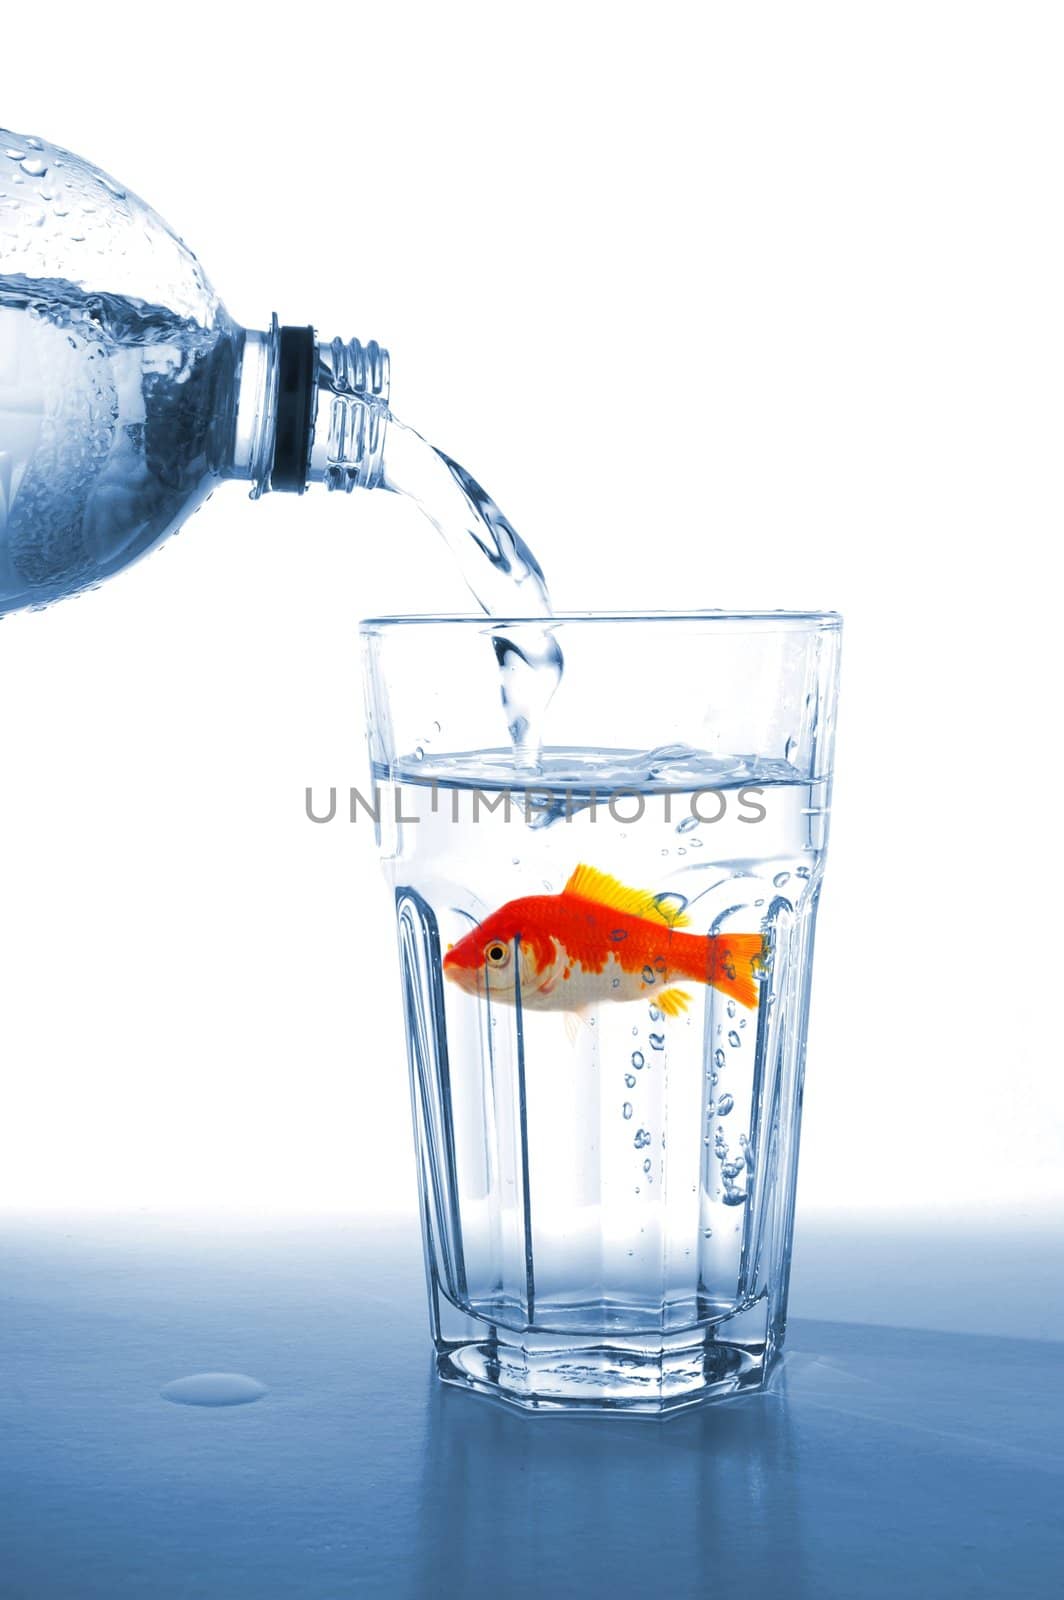 goldfish in water glass fishtank isolated on white background